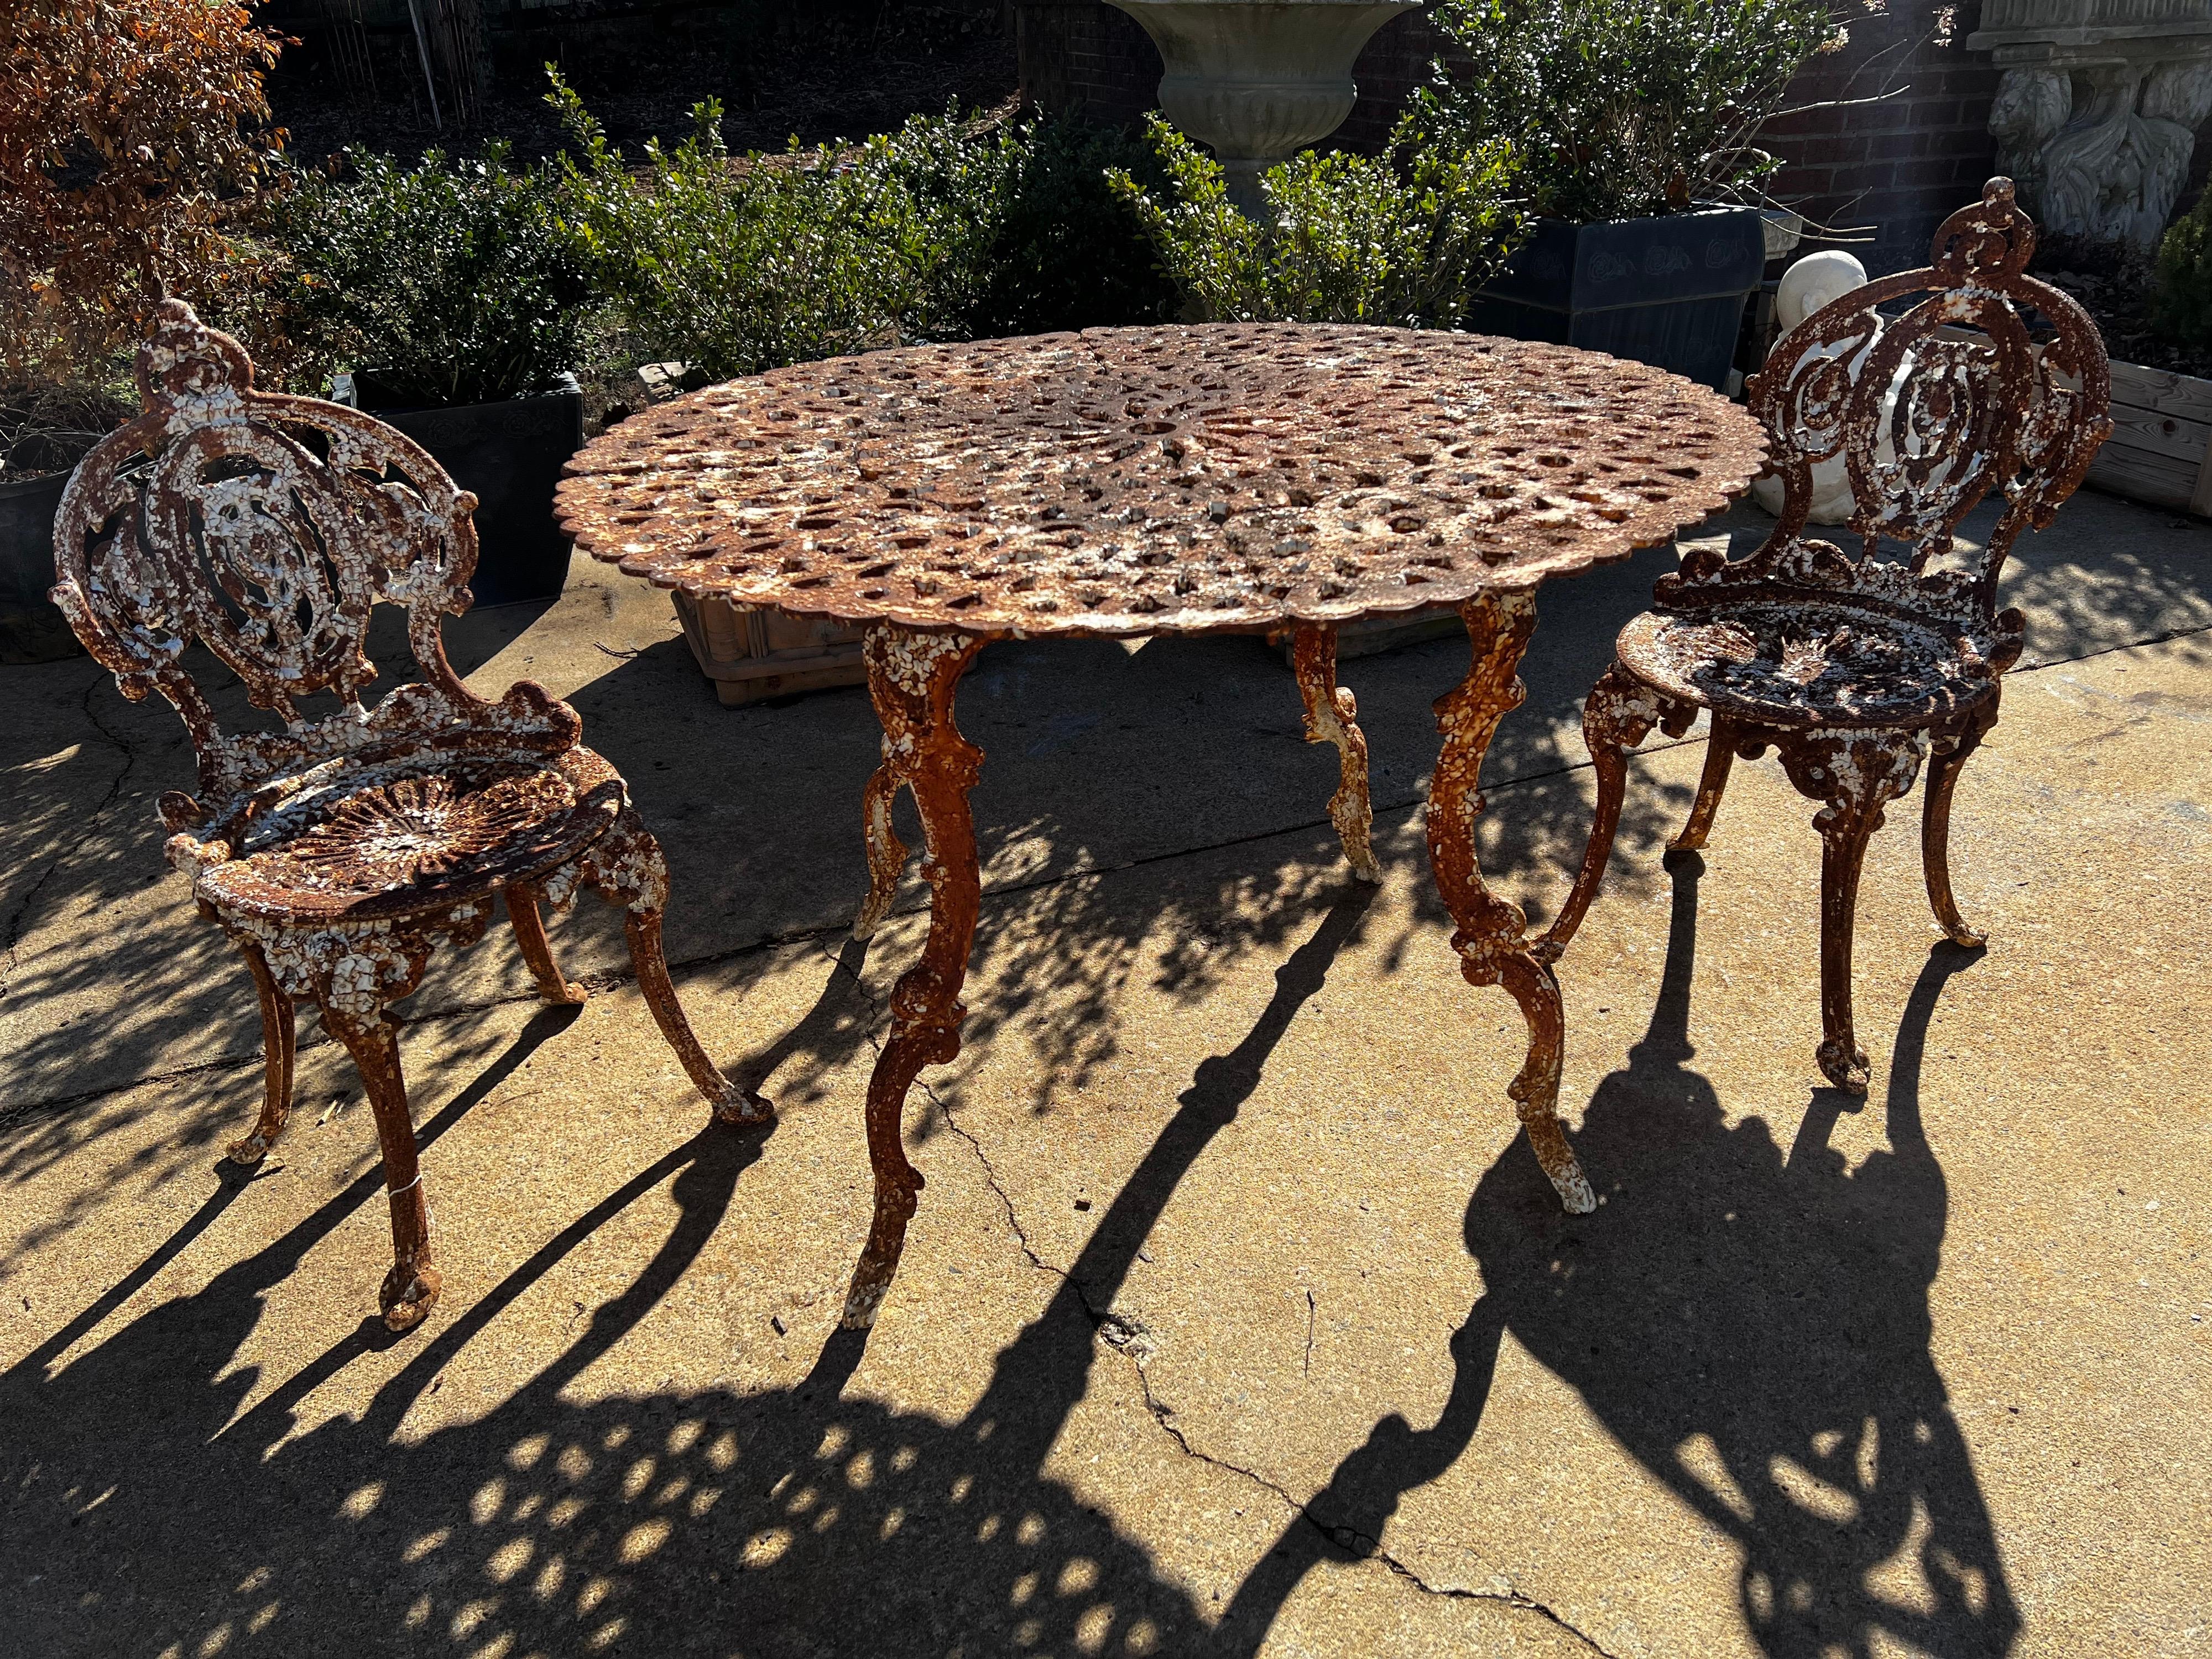 Antique Garden/Patio set with table and two chairs. Gorgeous natural patina that would be hard to mimic so we have left them as is. 

Decorative pattern with dolphin legs on the table. Price is for the full set.

Chairs and table all sturdy and